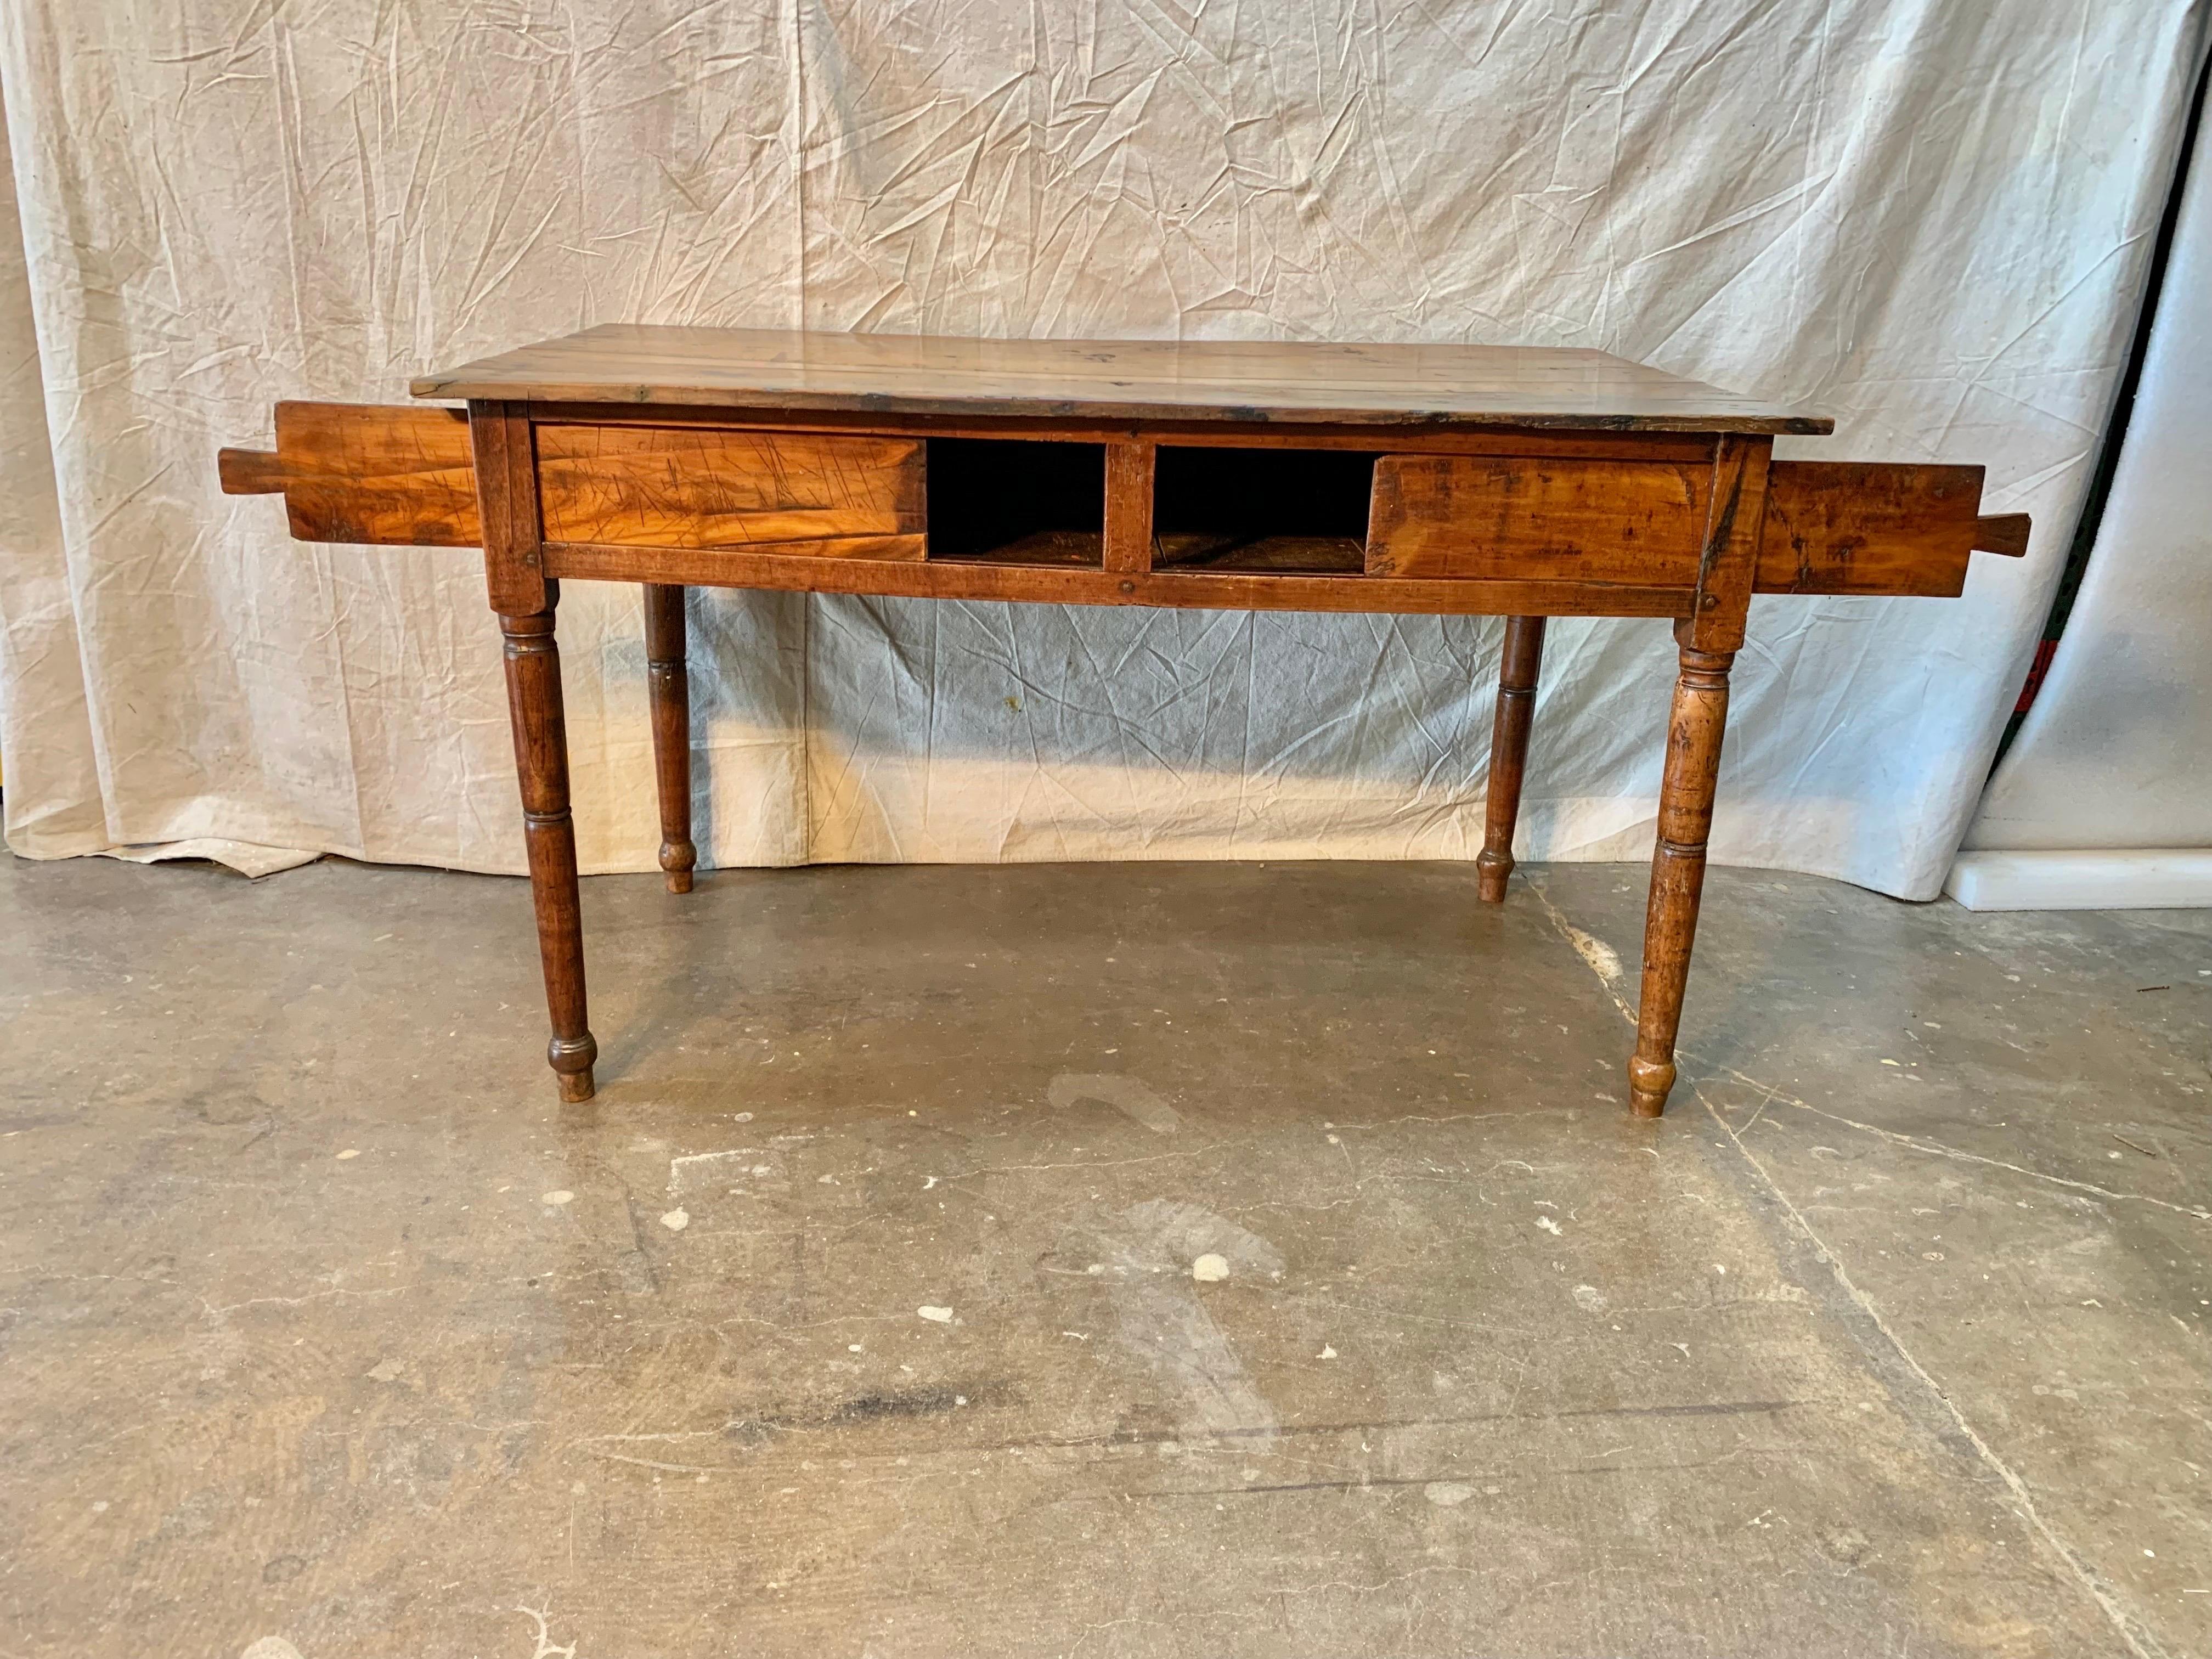 Hand-Crafted 19th Century French Walnut Farm Table With Sliding Panels and Storage For Sale